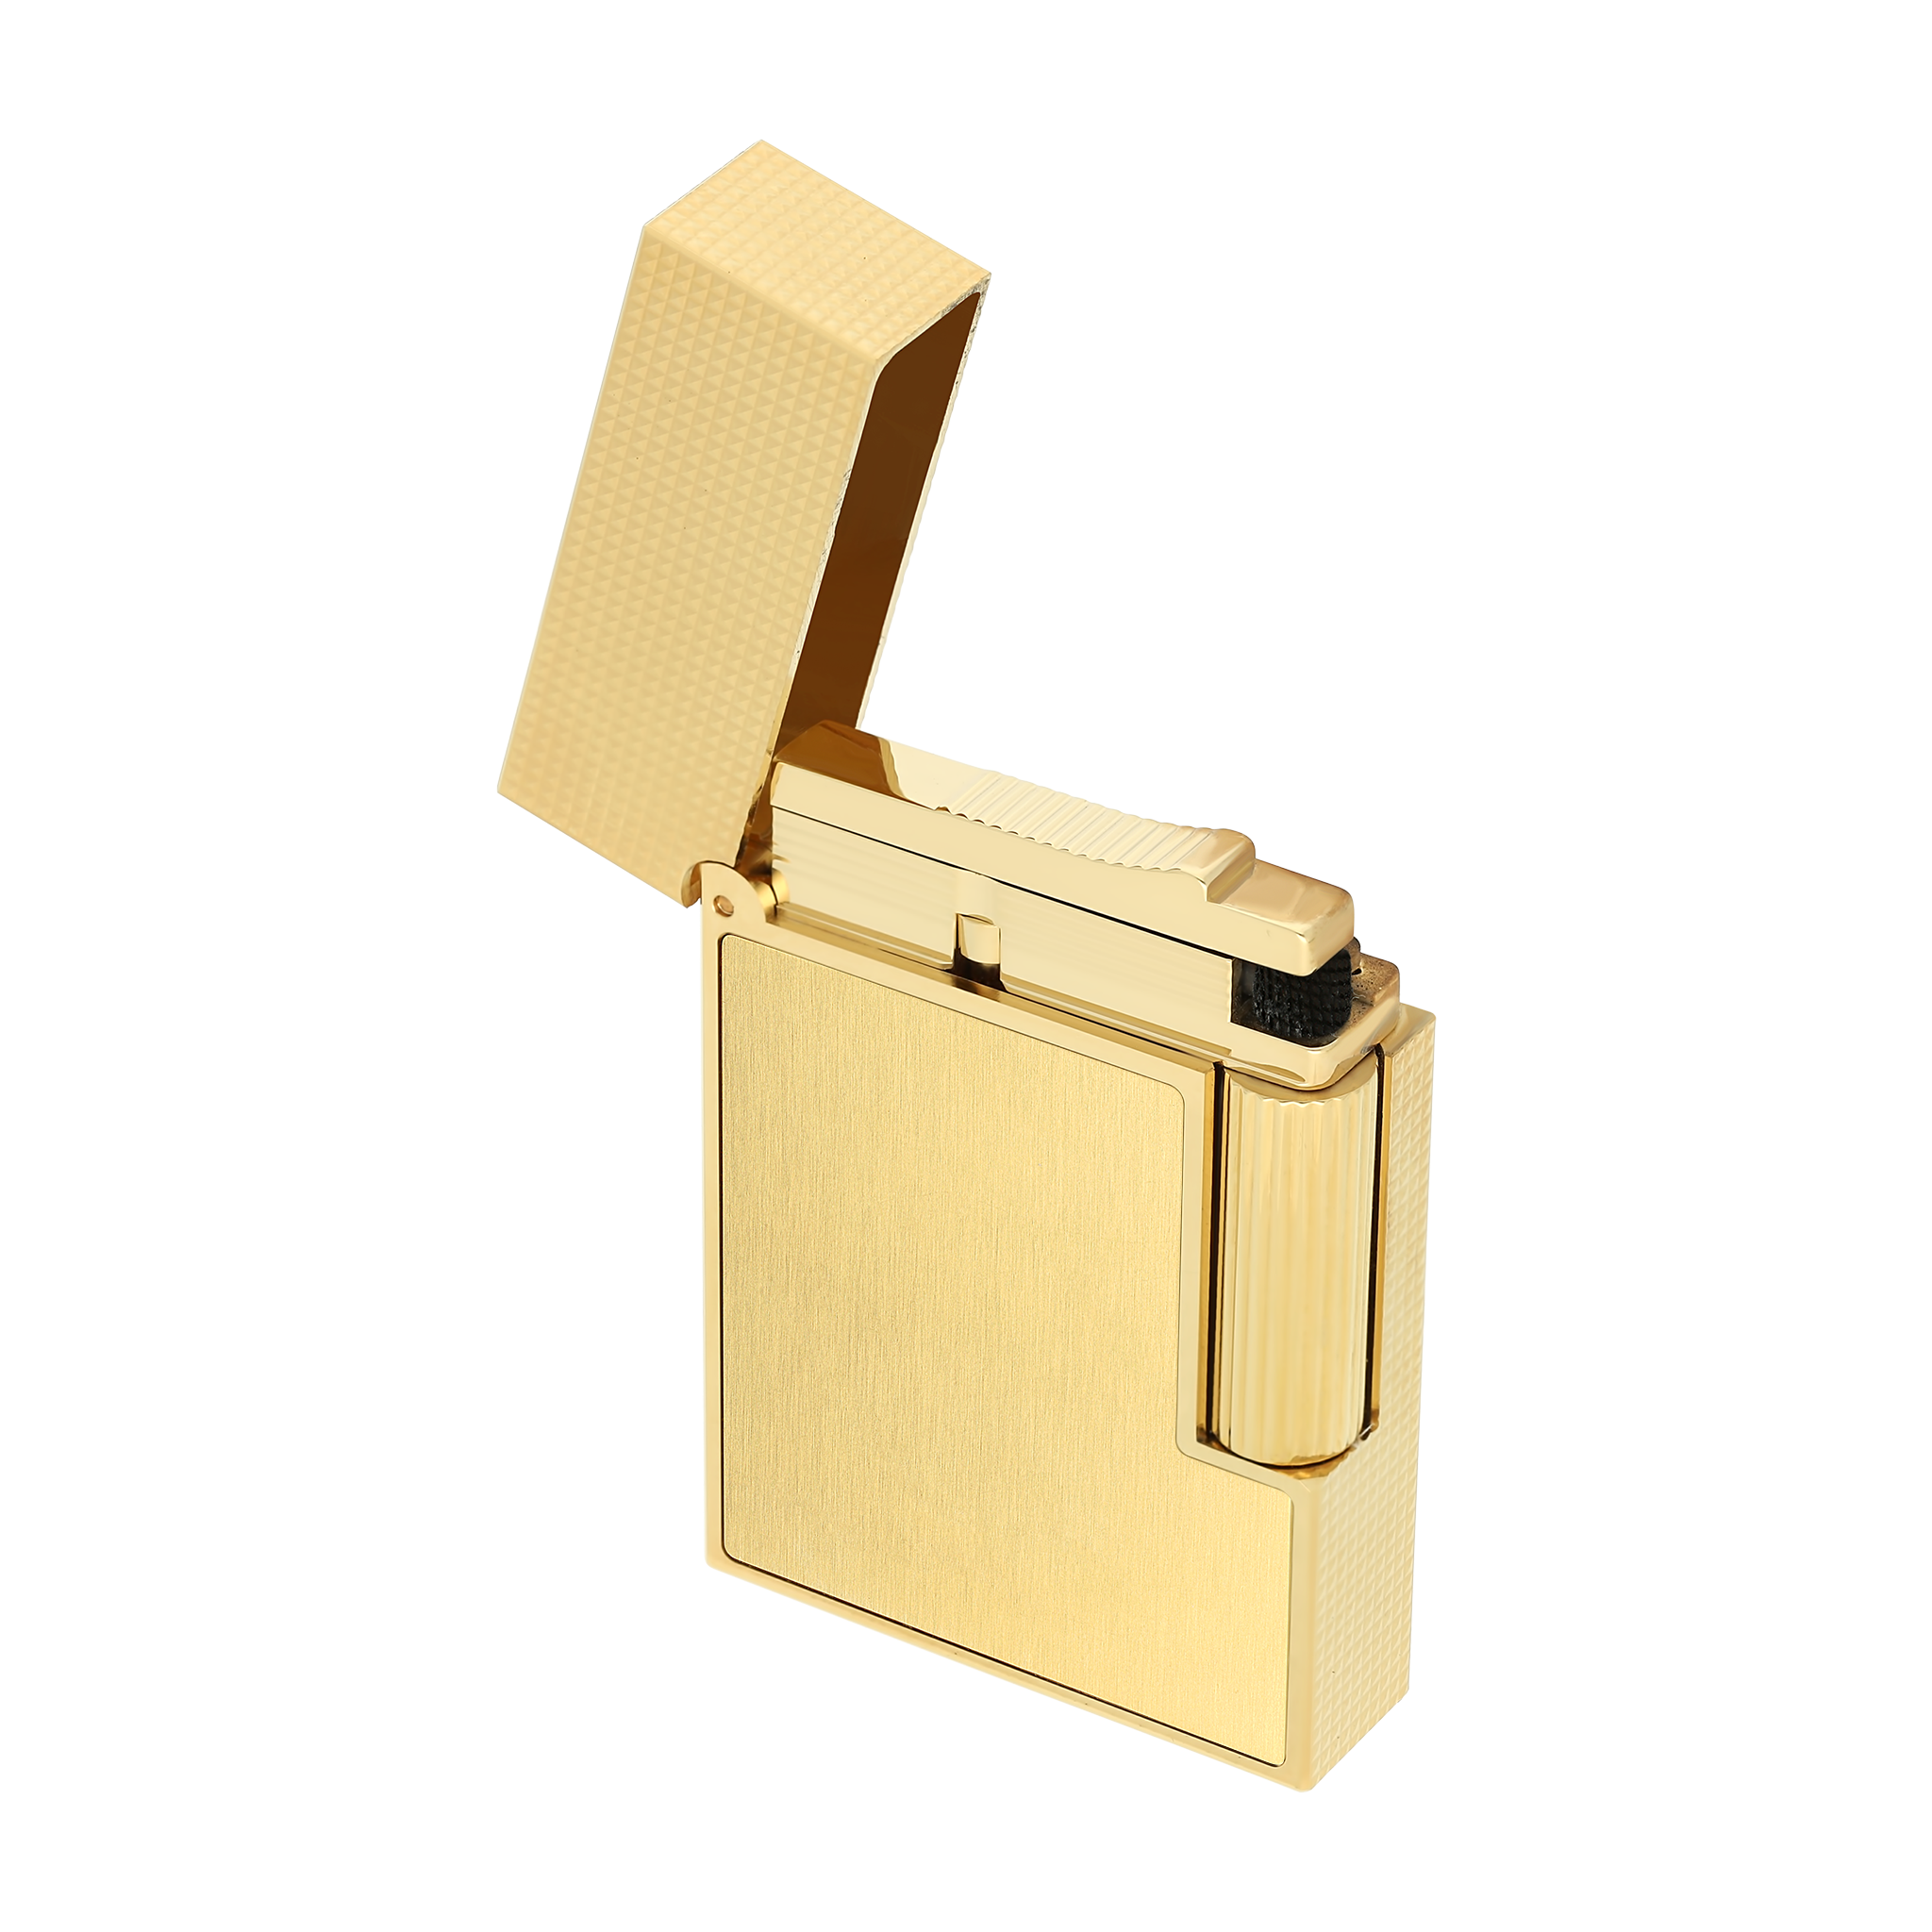 Ligne gold Lighter lighter Luxury yellow Dupont - brushed S.T. | – 2 small